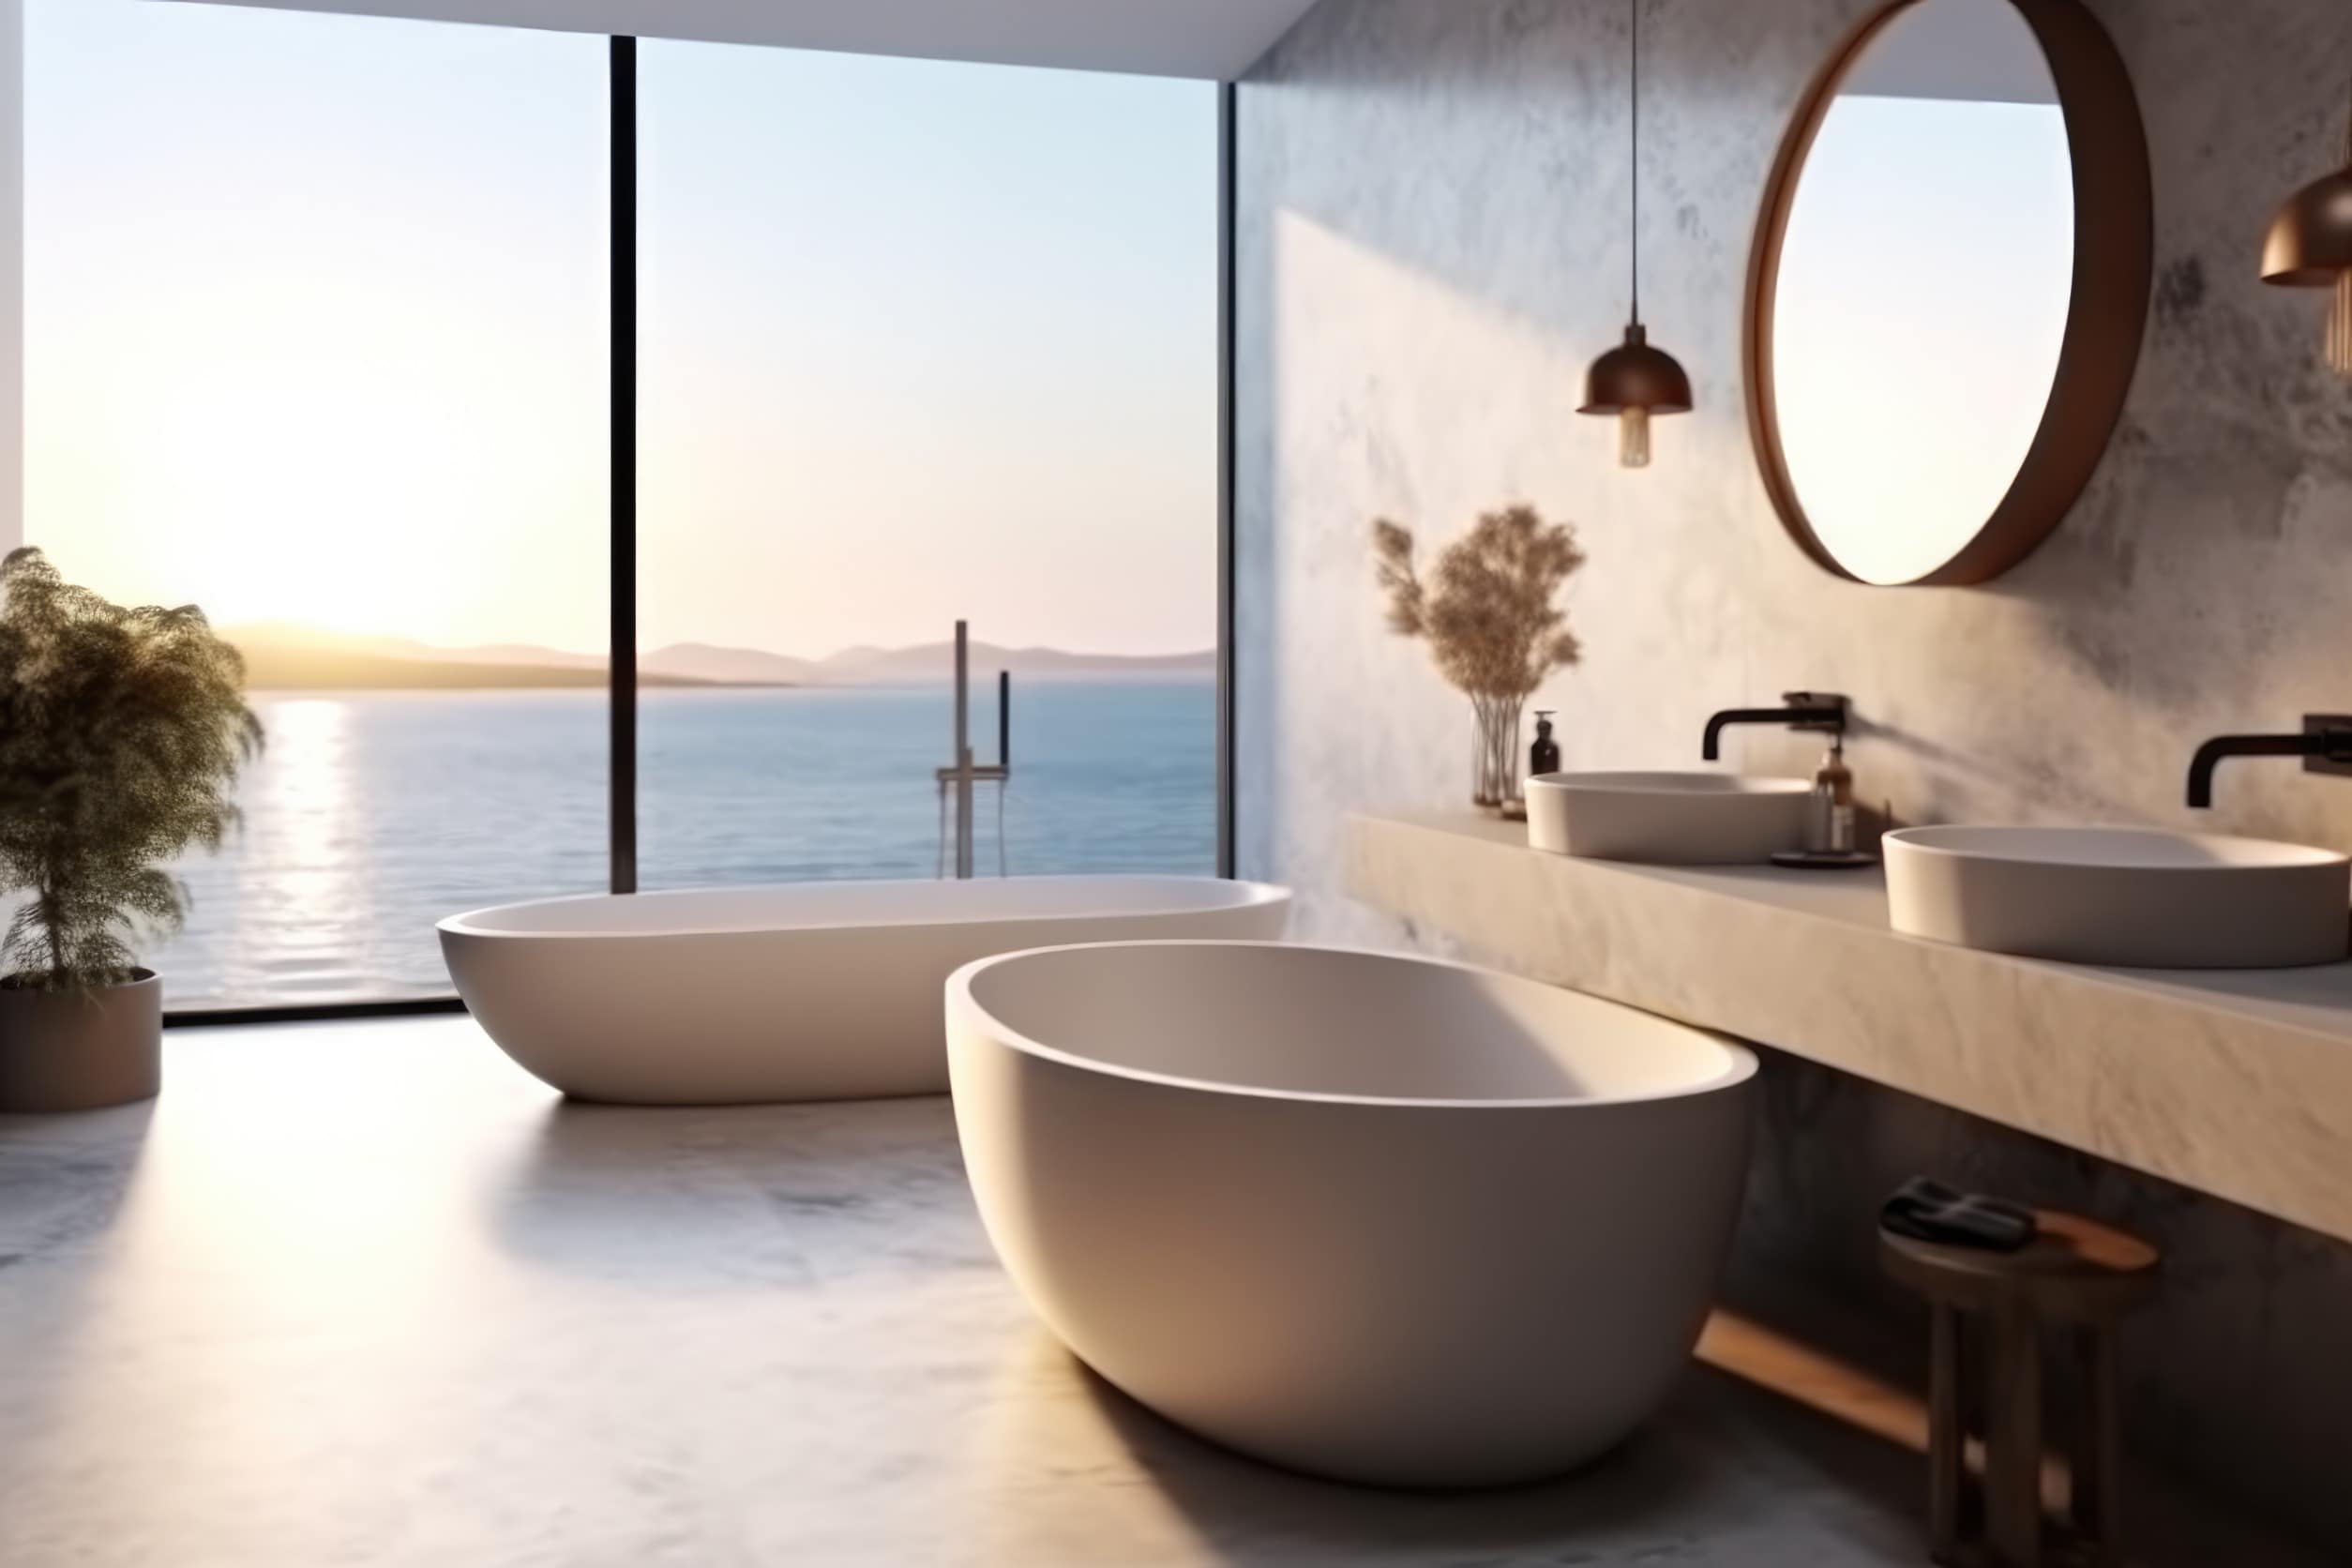 A remodled bathroom with a luxurious and minimalist style